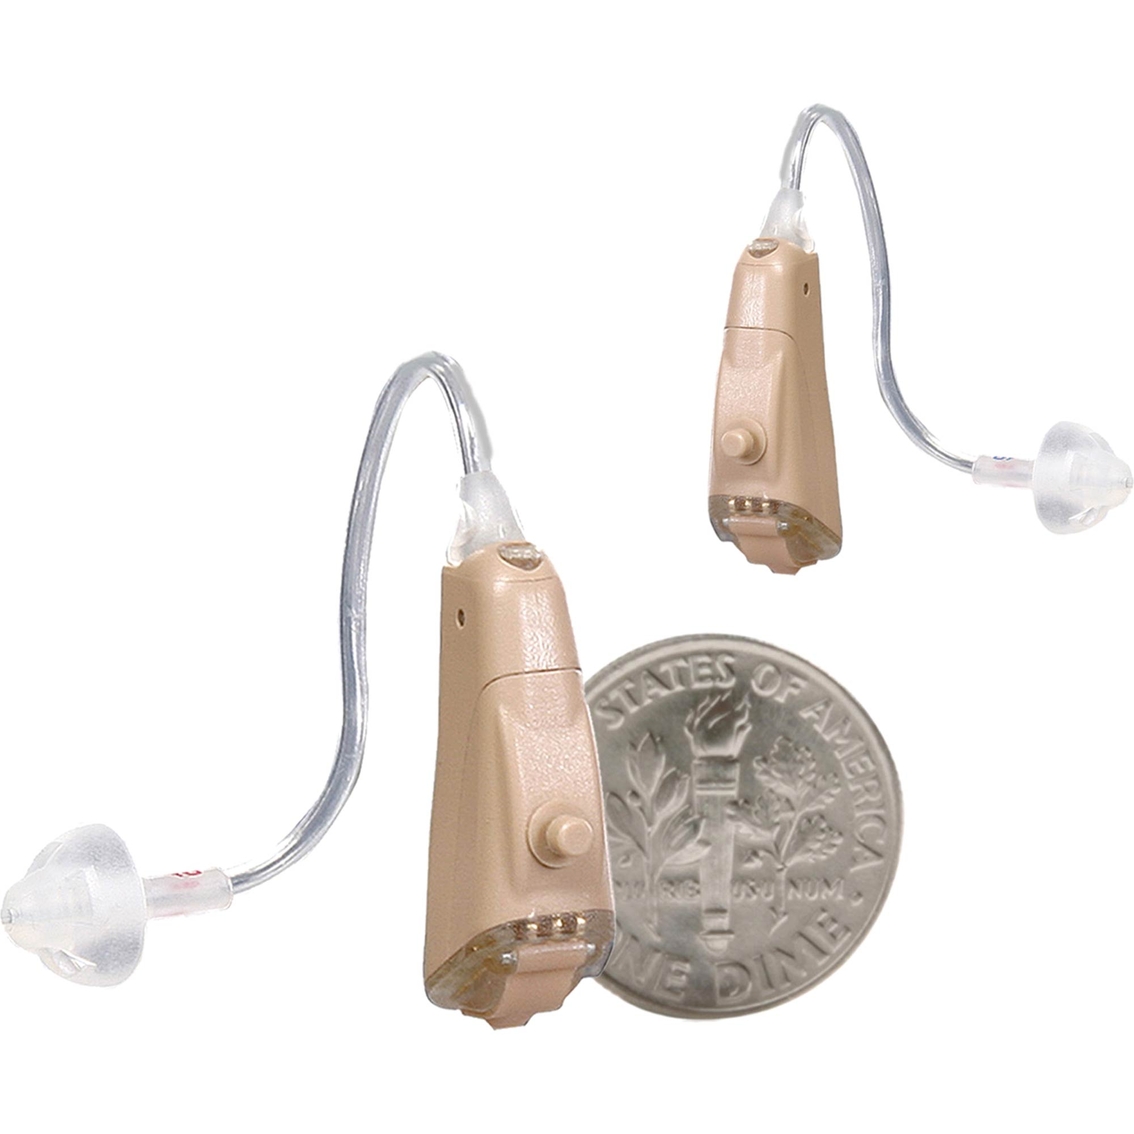 General Hearing Instruments Simplicity Smart Touch Digital Hearing Aid Pair - Image 2 of 4